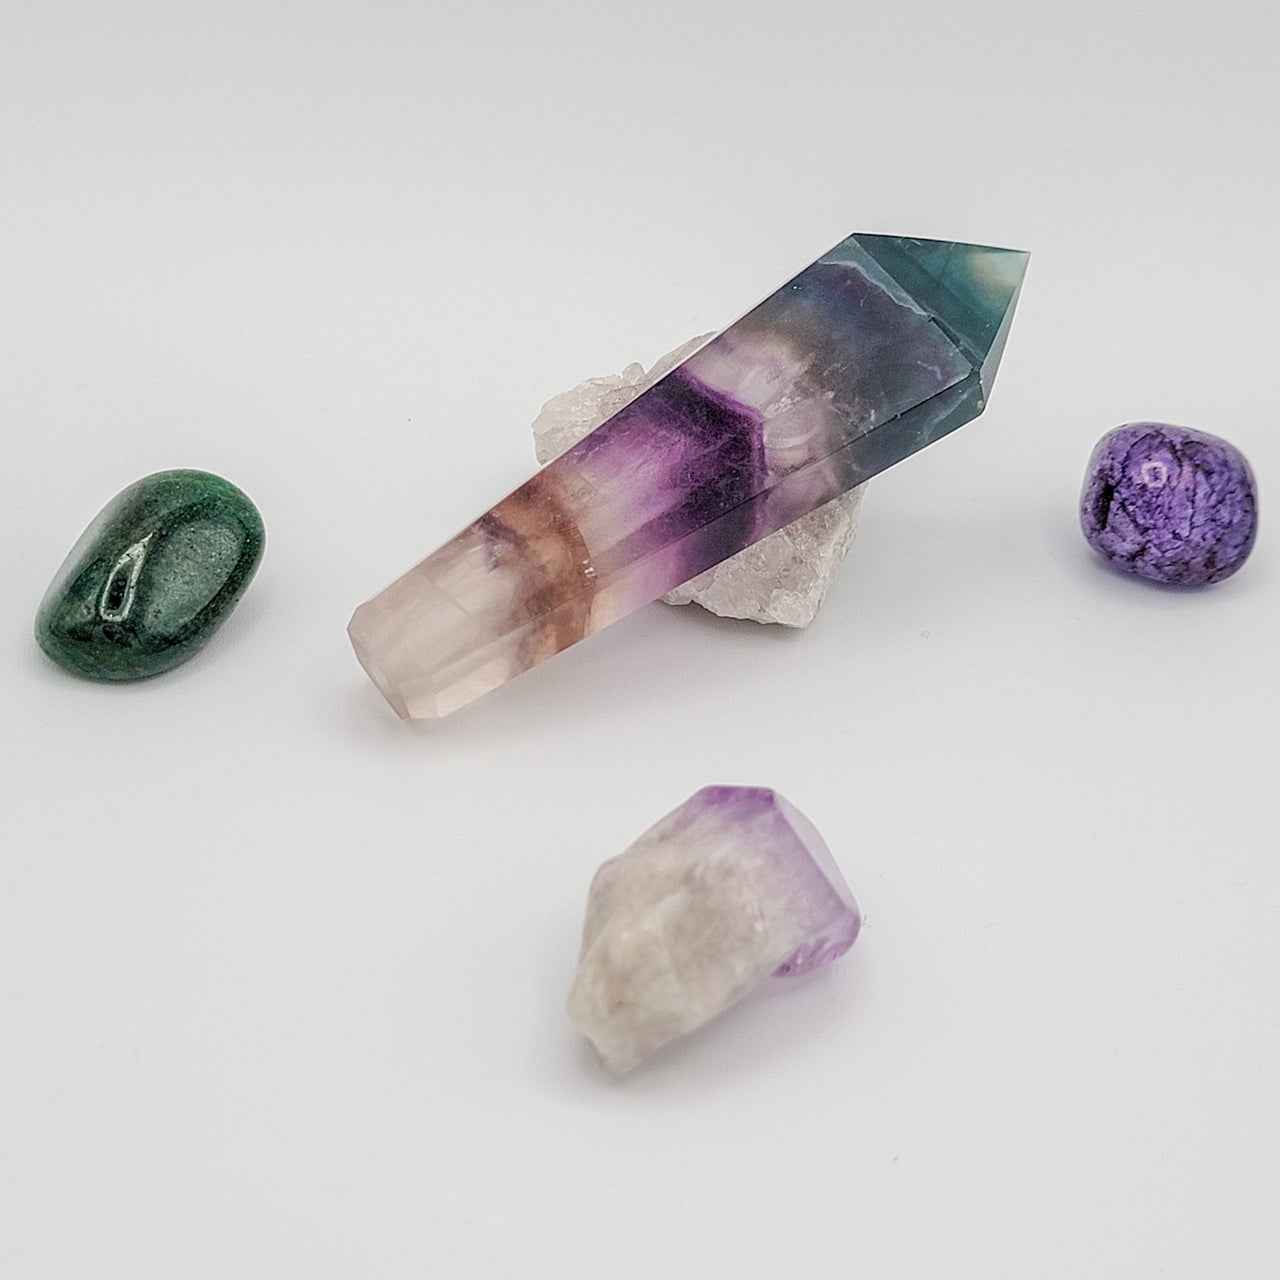 Aurora Borealis Fluorite Crystal Pipe, goes well with any quartz crystal smoking pipe. Check our multiple shipping options!